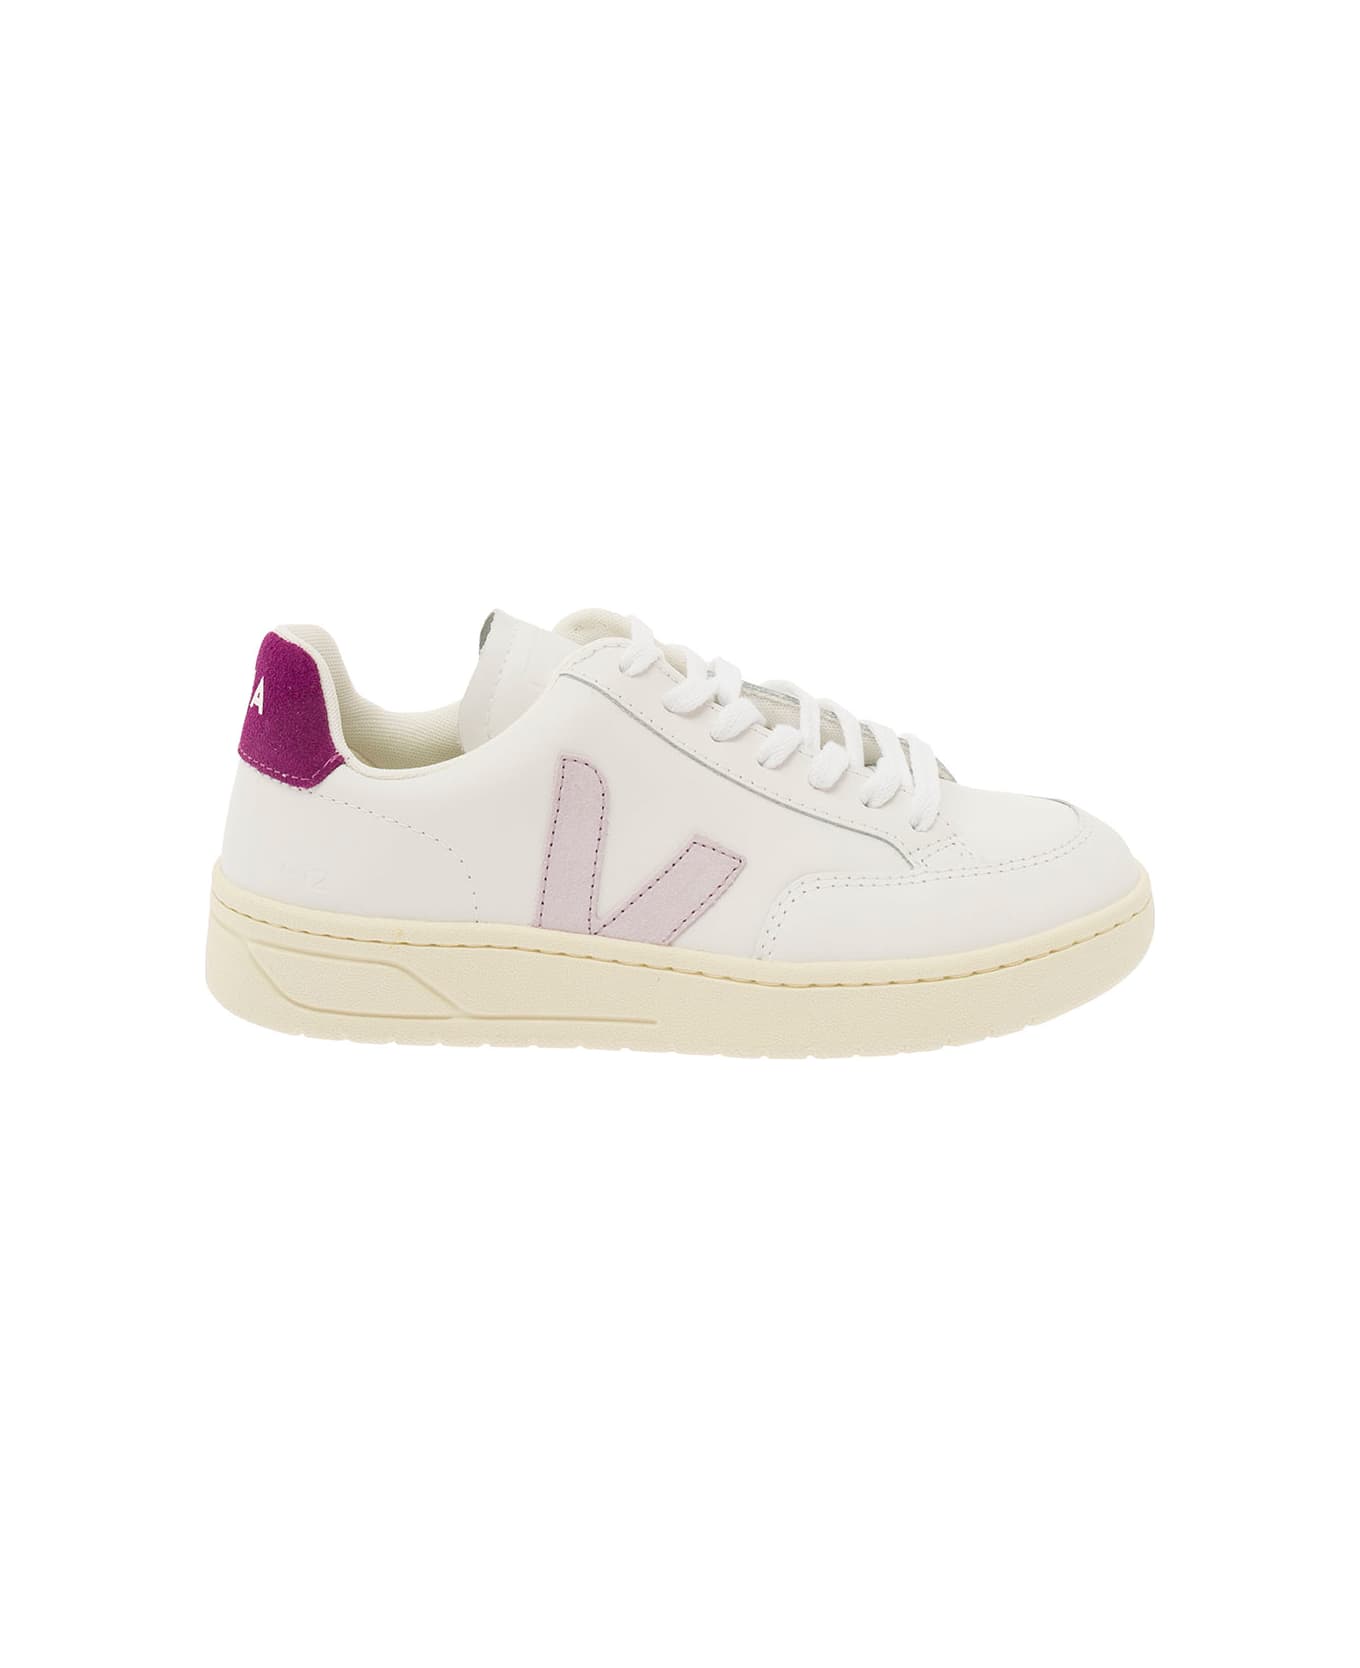 Veja White And Violet Sneakers With Logo Details In Leather Woman - White スニーカー